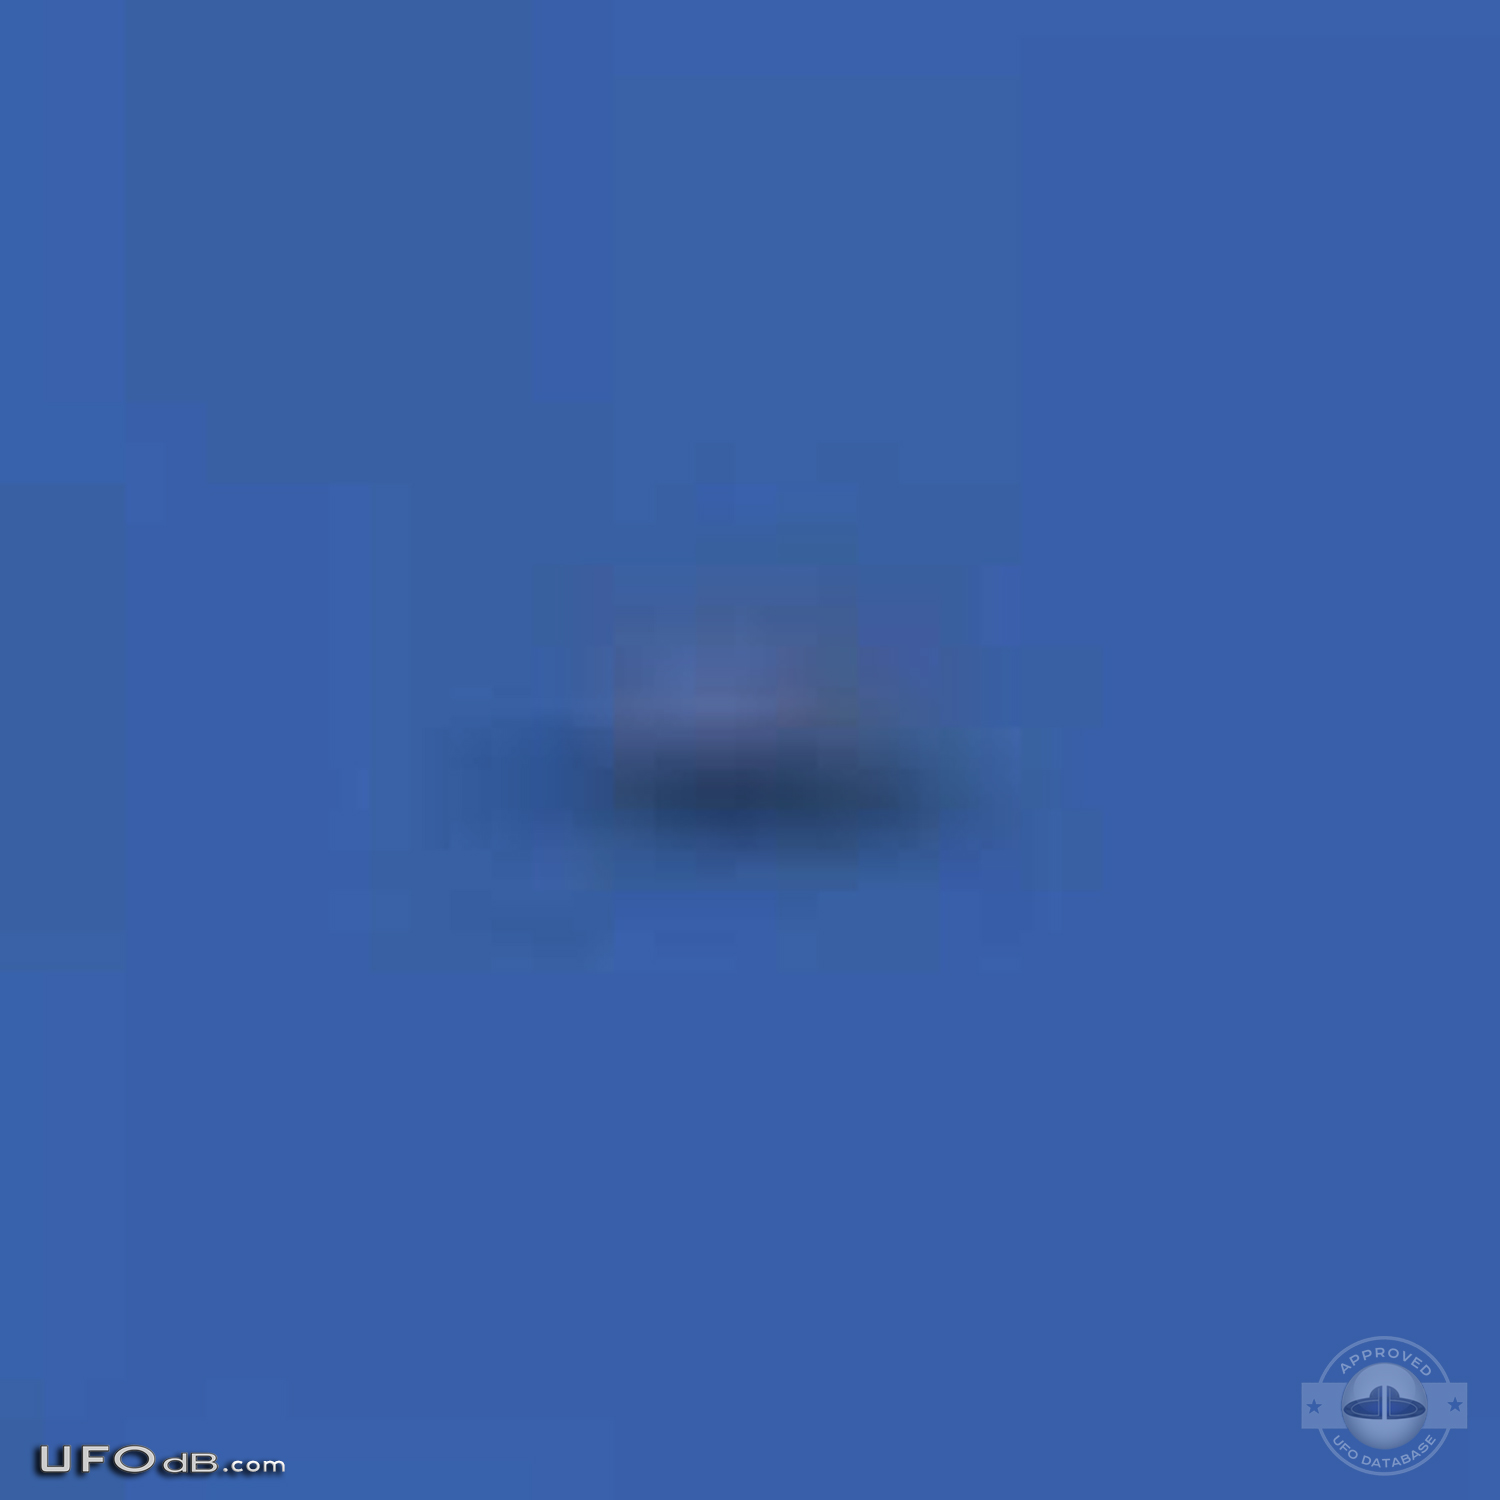 In Cape Town, South Africa a man get picture of UFO near Airplane 2011 UFO Picture #386-3